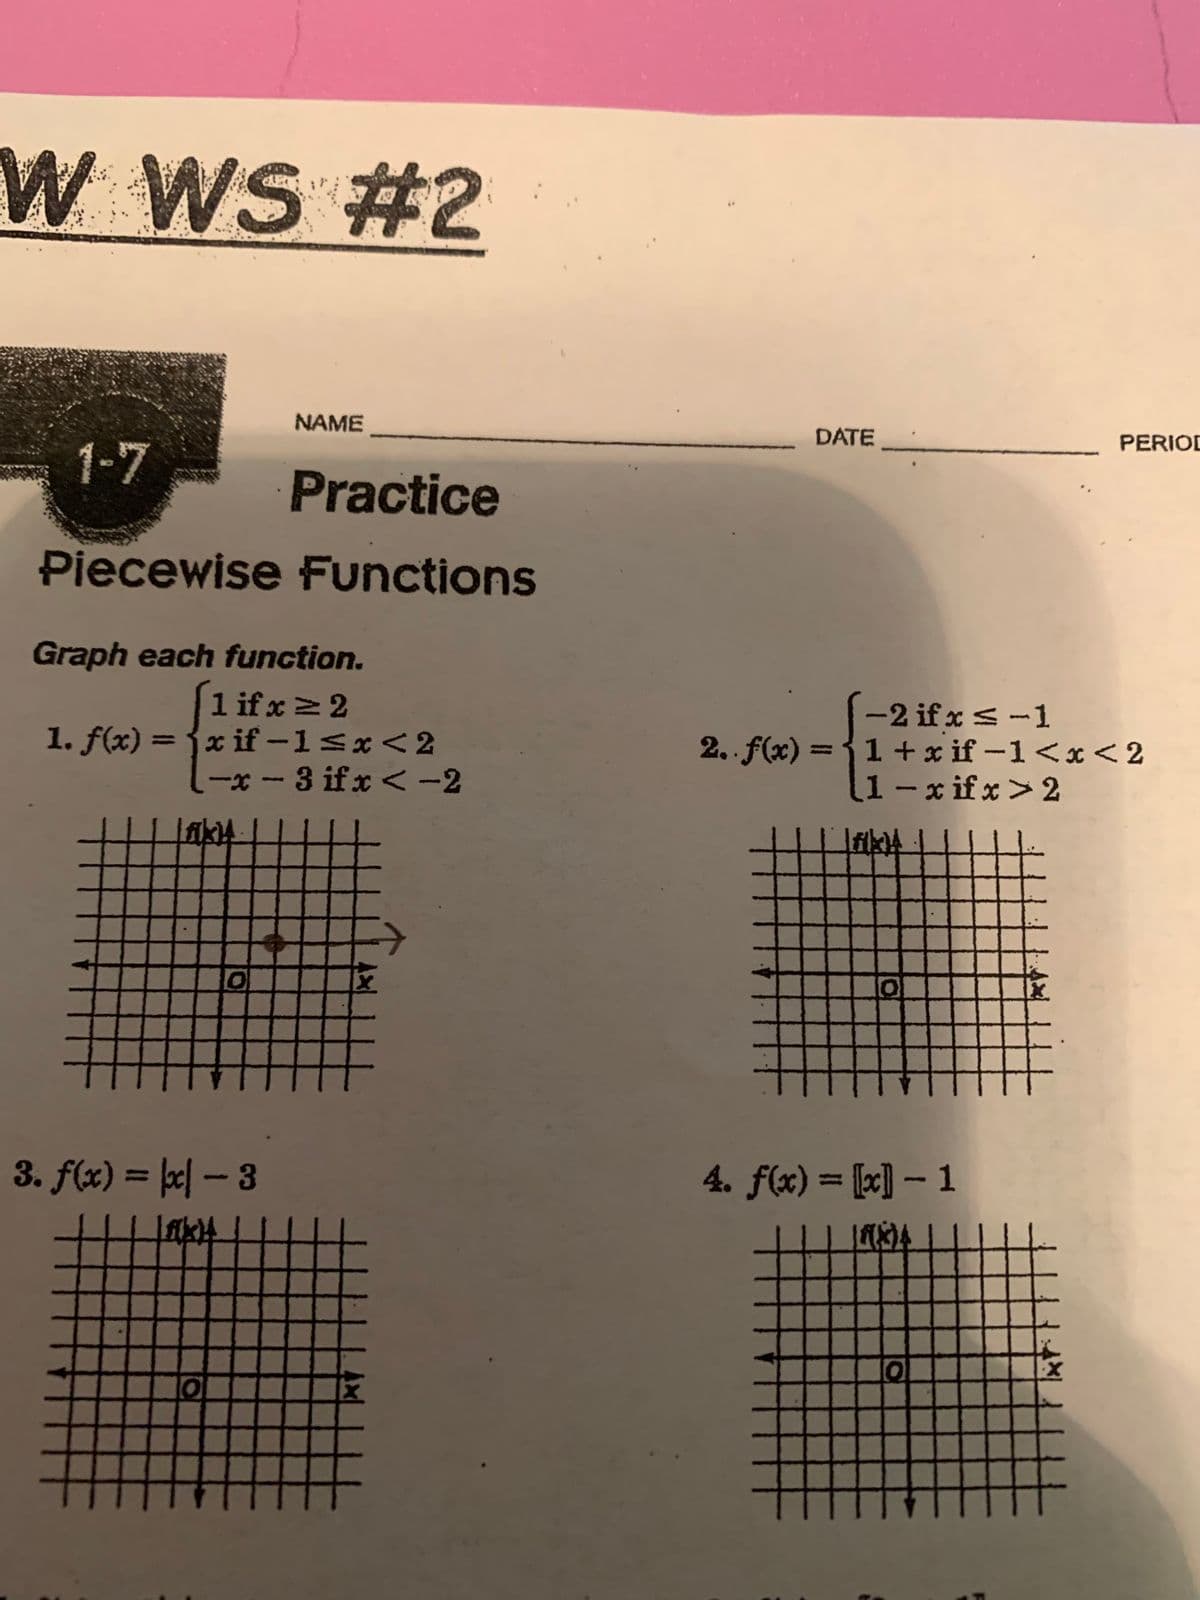 W WS #2
Practice
Piecewise Functions
Liku
Graph each function.
[1 if x ≥ 2
1. f(x) = {x if-1<x<2
-x-3 if x < -2
O
NAME
.
3. f(x) = x - 3
If(kx)4
DATE
-2 if x ≤-1
2.. f(x) = { 1 + xif-1<x<2
1-xifx>2
H
Jakoy
0
4. f(x) = [x]-1
LISA
PERIOD